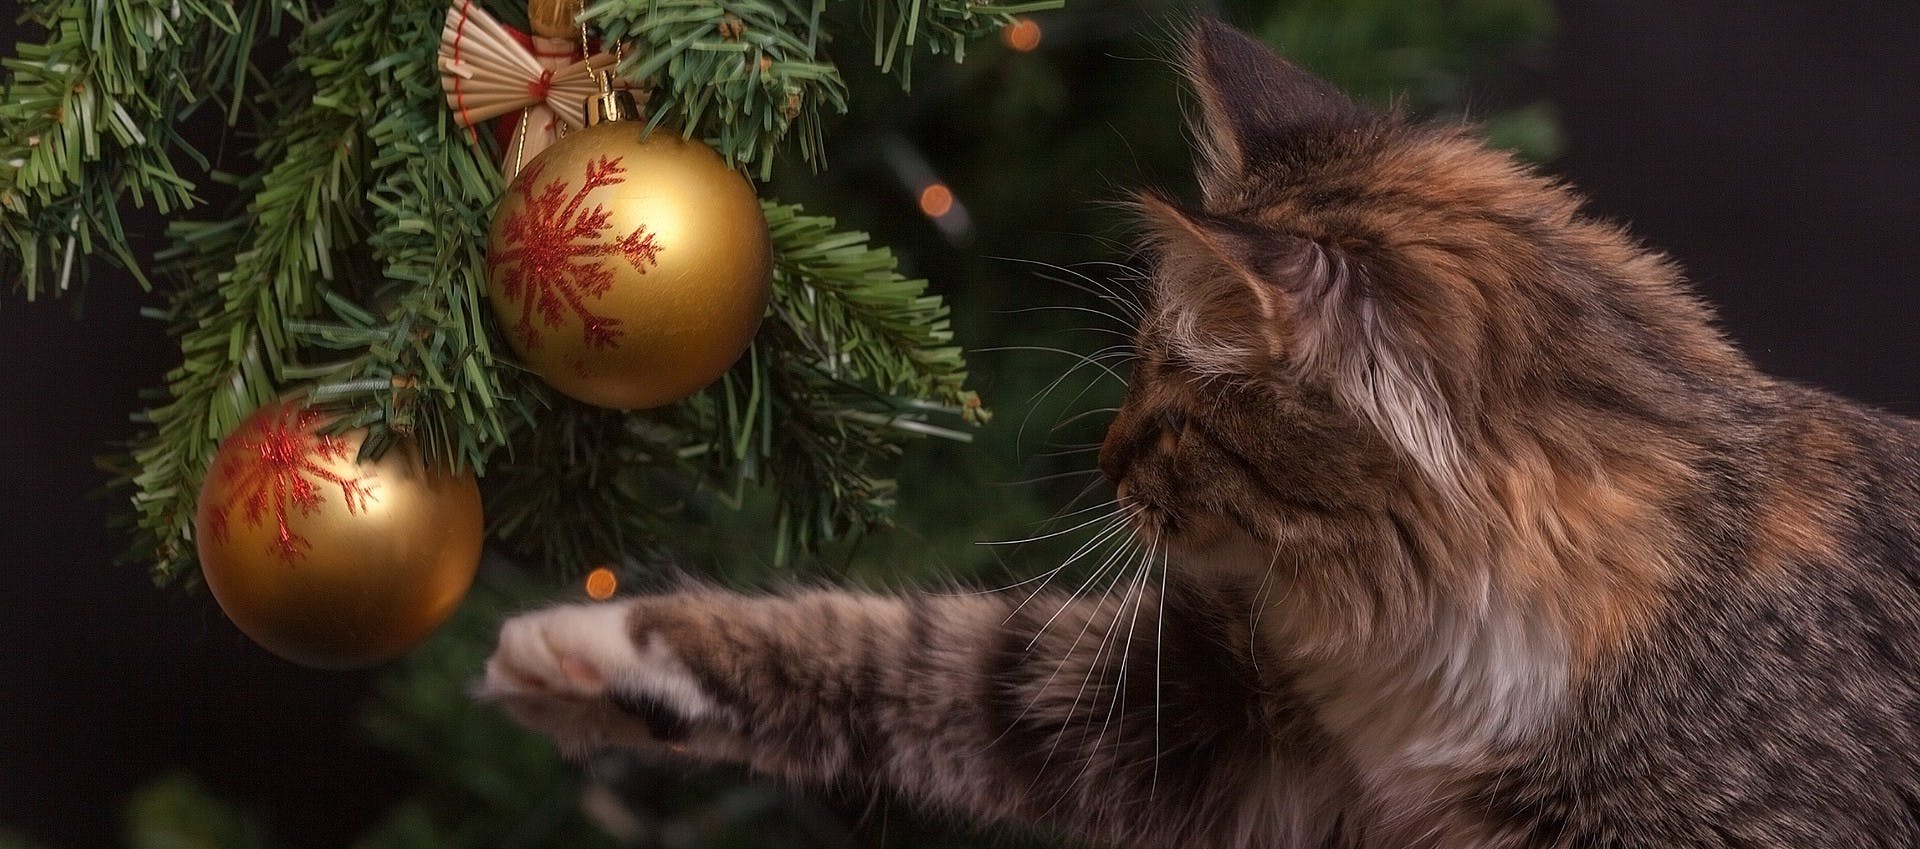 Are Christmas Trees Dangerous for Dogs or Cats?